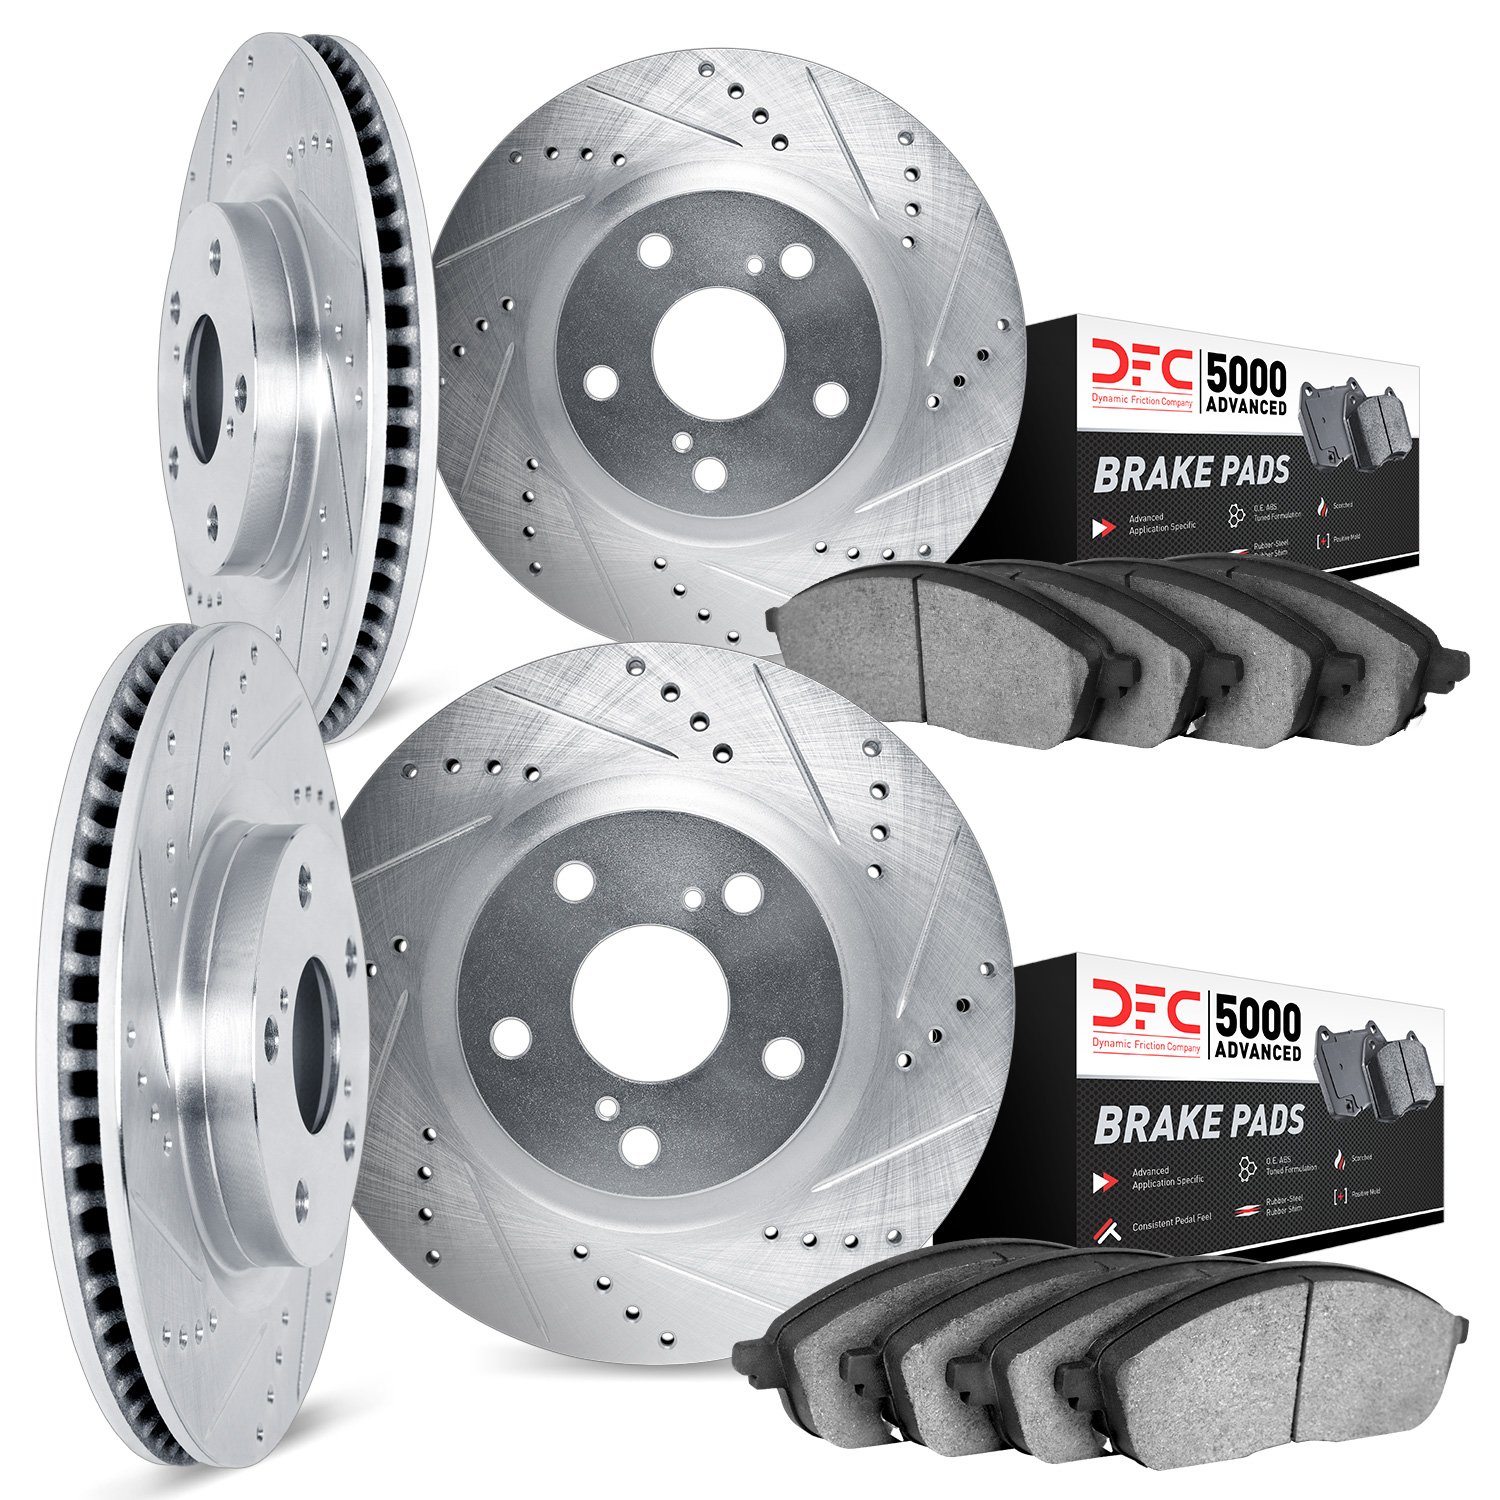 7504-75002 Drilled/Slotted Brake Rotors w/5000 Advanced Brake Pads Kit [Silver], 1995-2000 Lexus/Toyota/Scion, Position: Front a